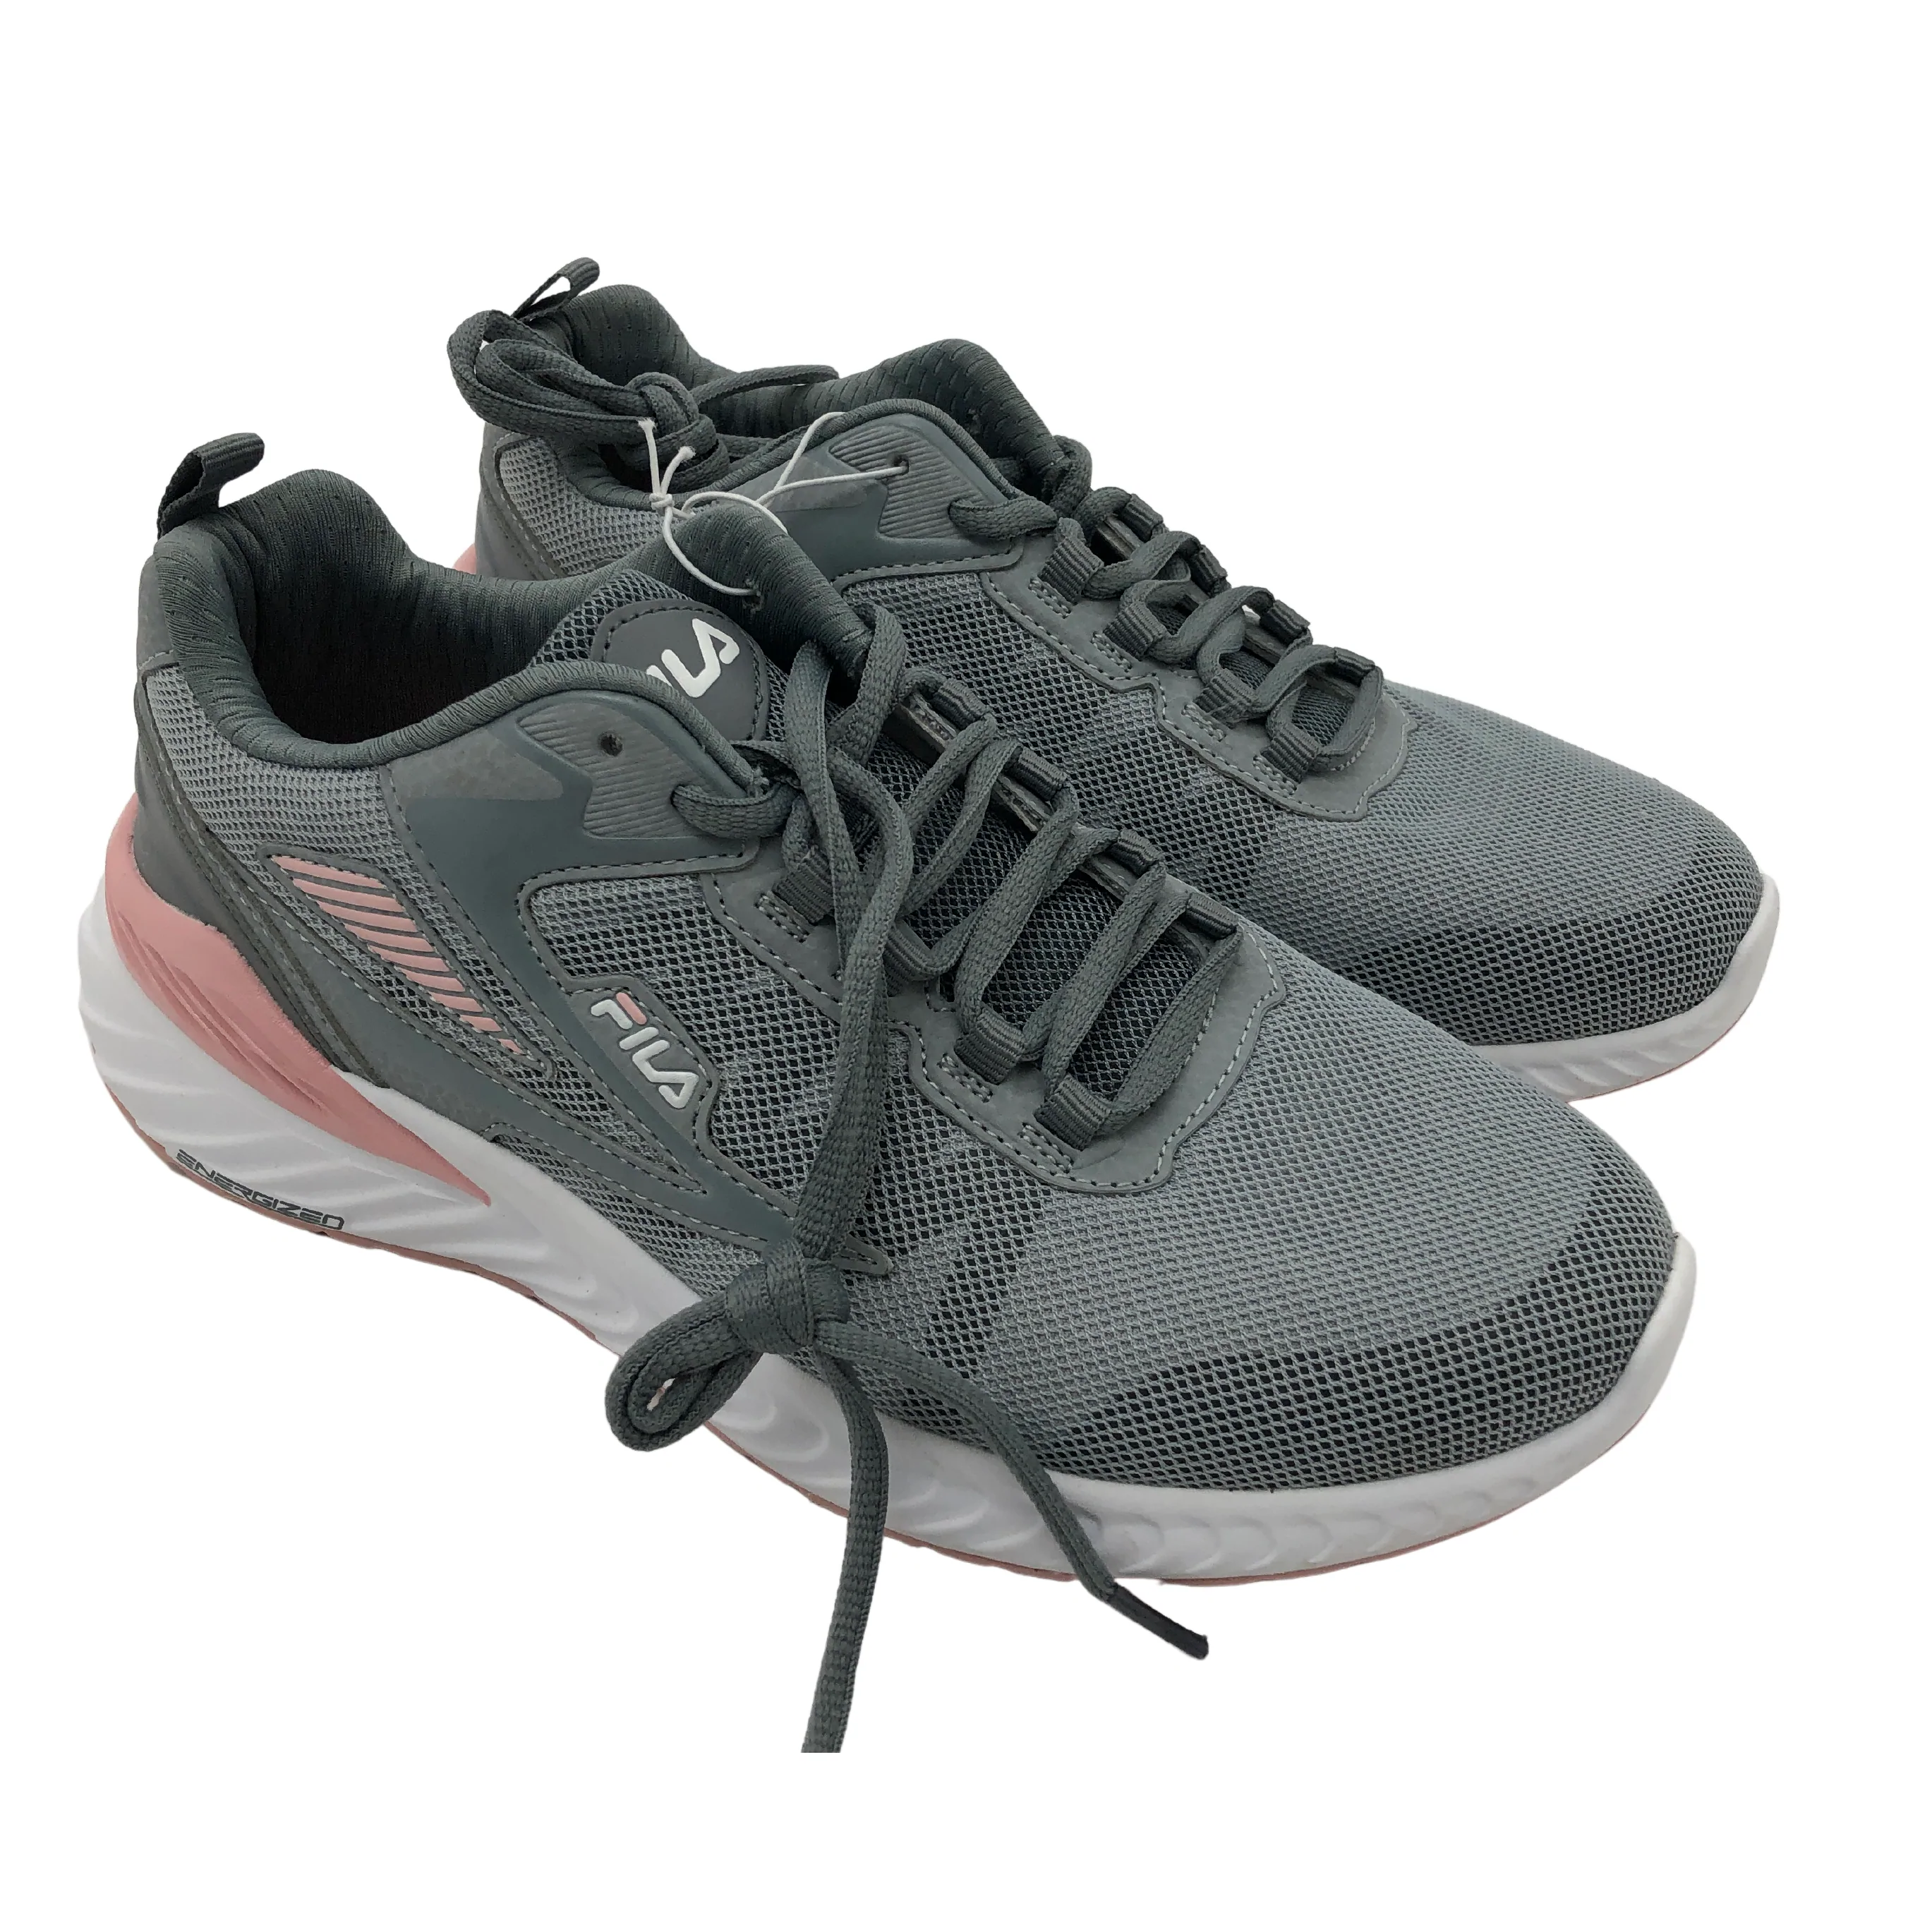 Fila Women's Running Shoes / Trazoros Energized 2 / Grey & Pink / Size 10 **No Tags**